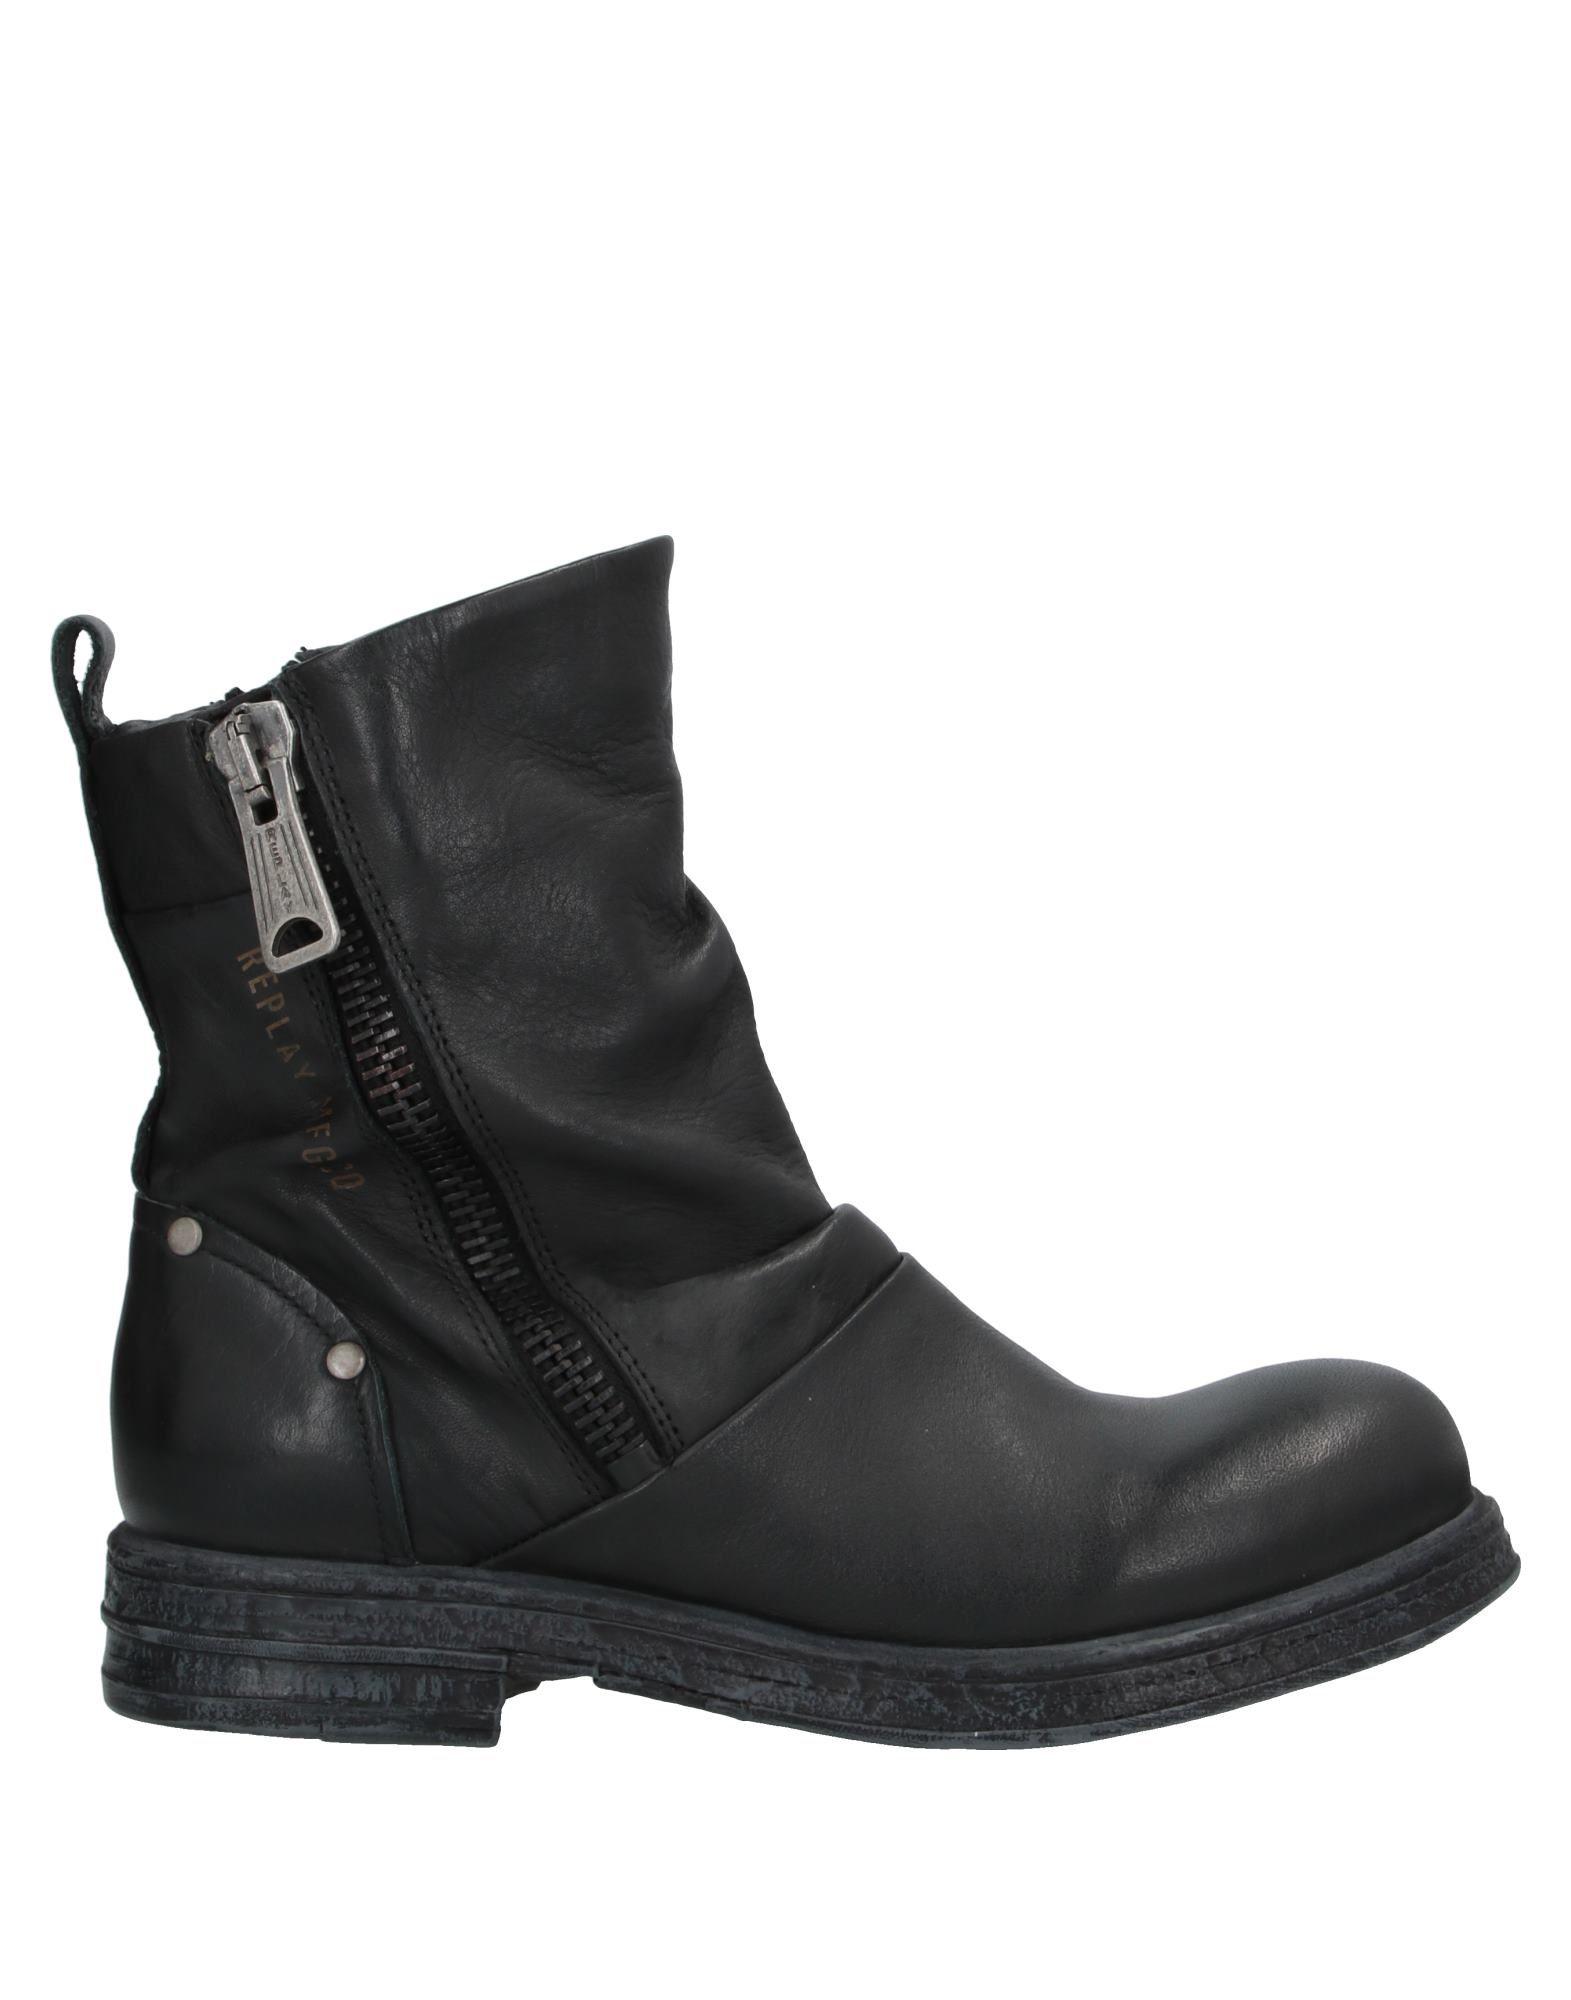 Replay Leather Ankle Boots in Black - Lyst